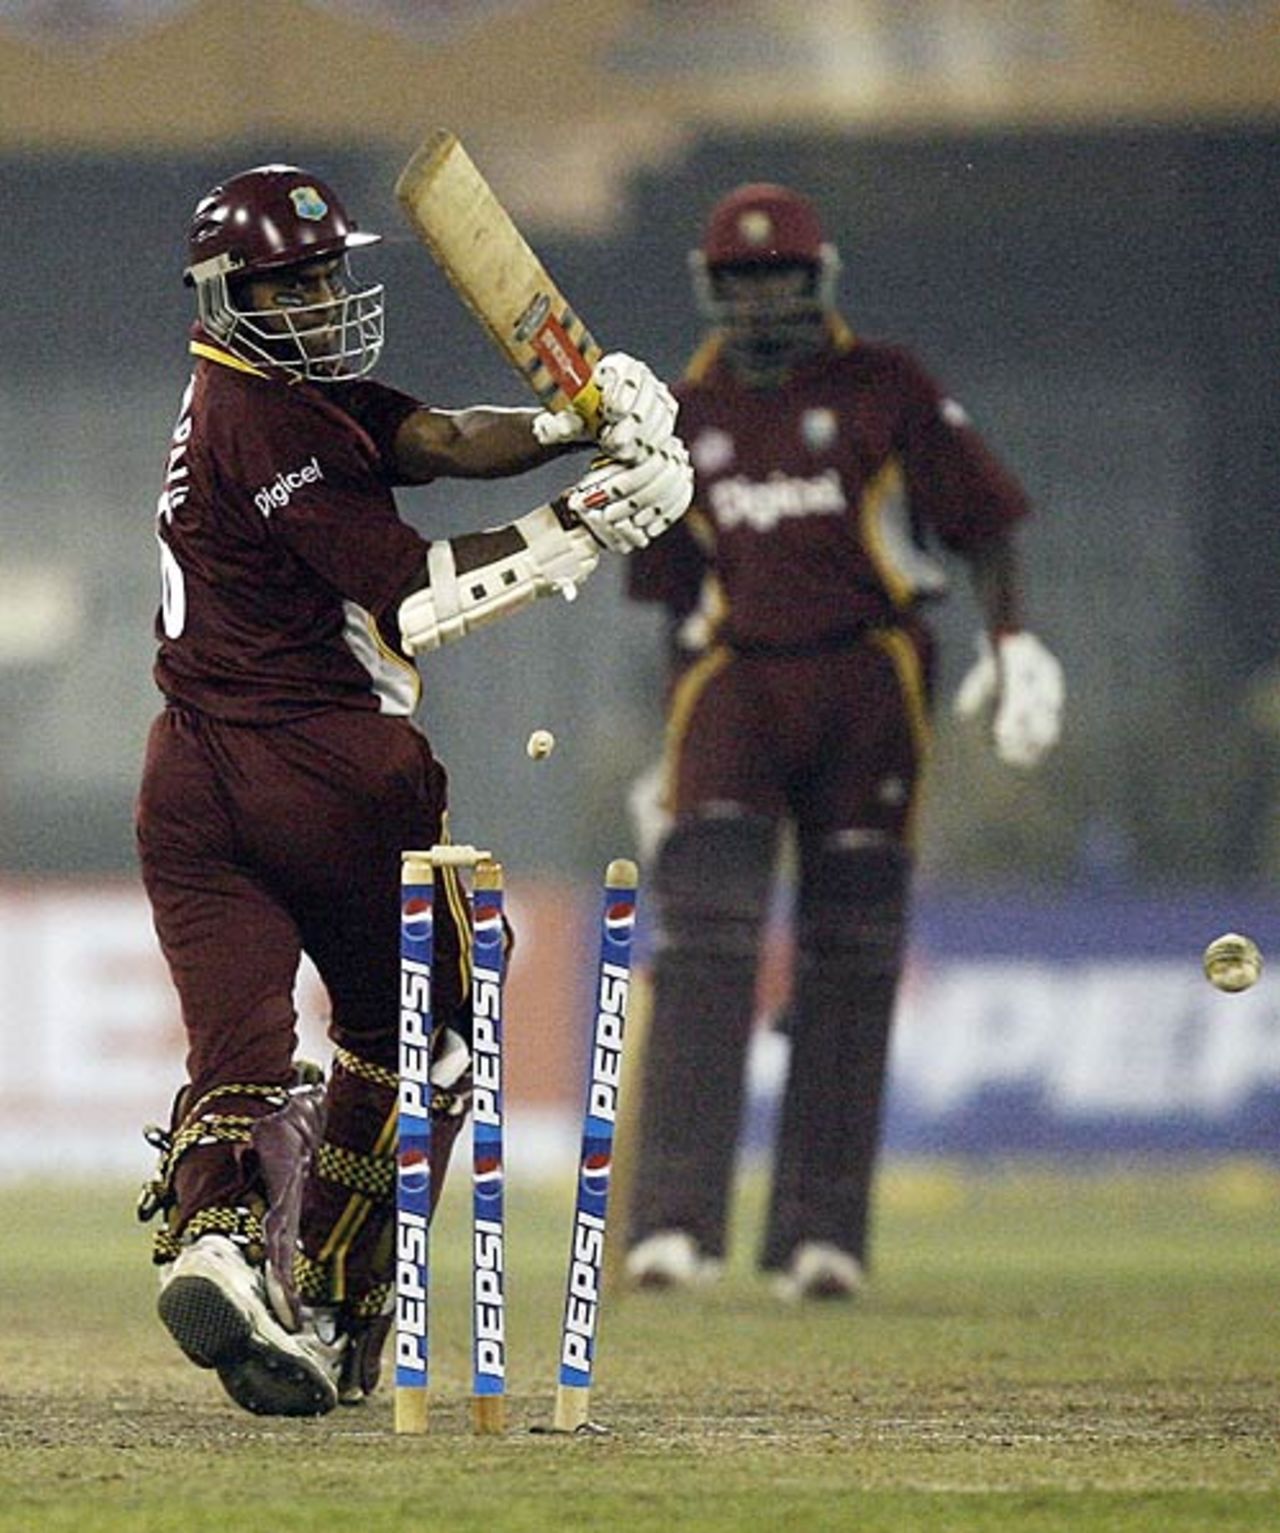 Shivnarine Chanderpaul is bowled by Zaheer Khan, India v West Indies, 2nd ODI, Cuttack, January 24, 2007